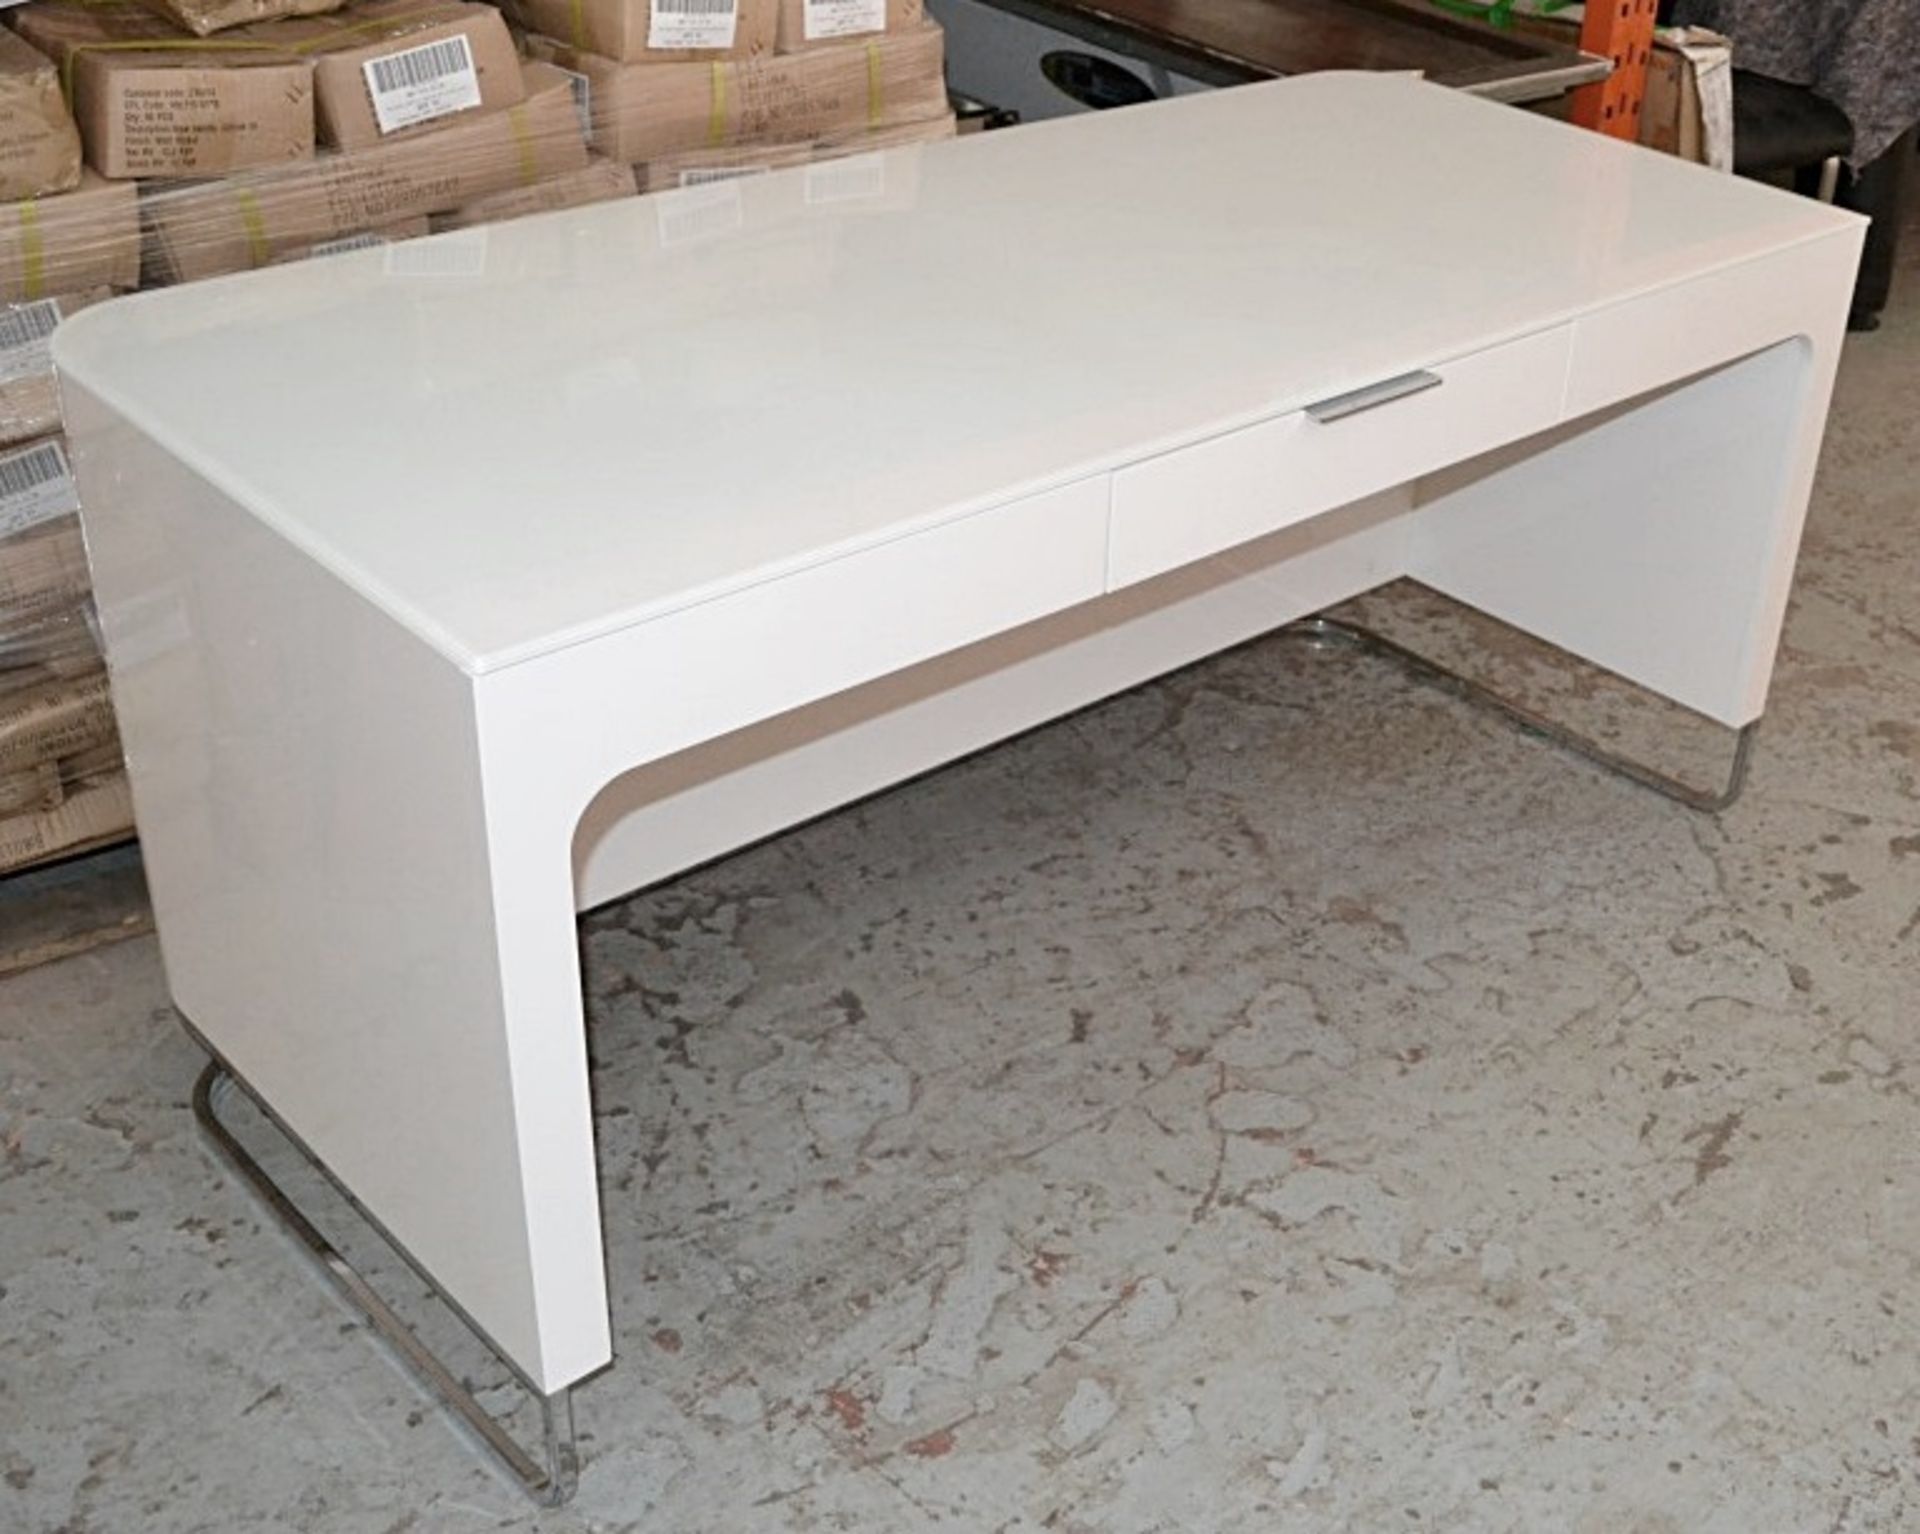 1 x LIGNE ROSET "Hyannis Port" Glass-topped Desk With A Gloss White Lacquer Finish - Dimensions: - Image 3 of 10